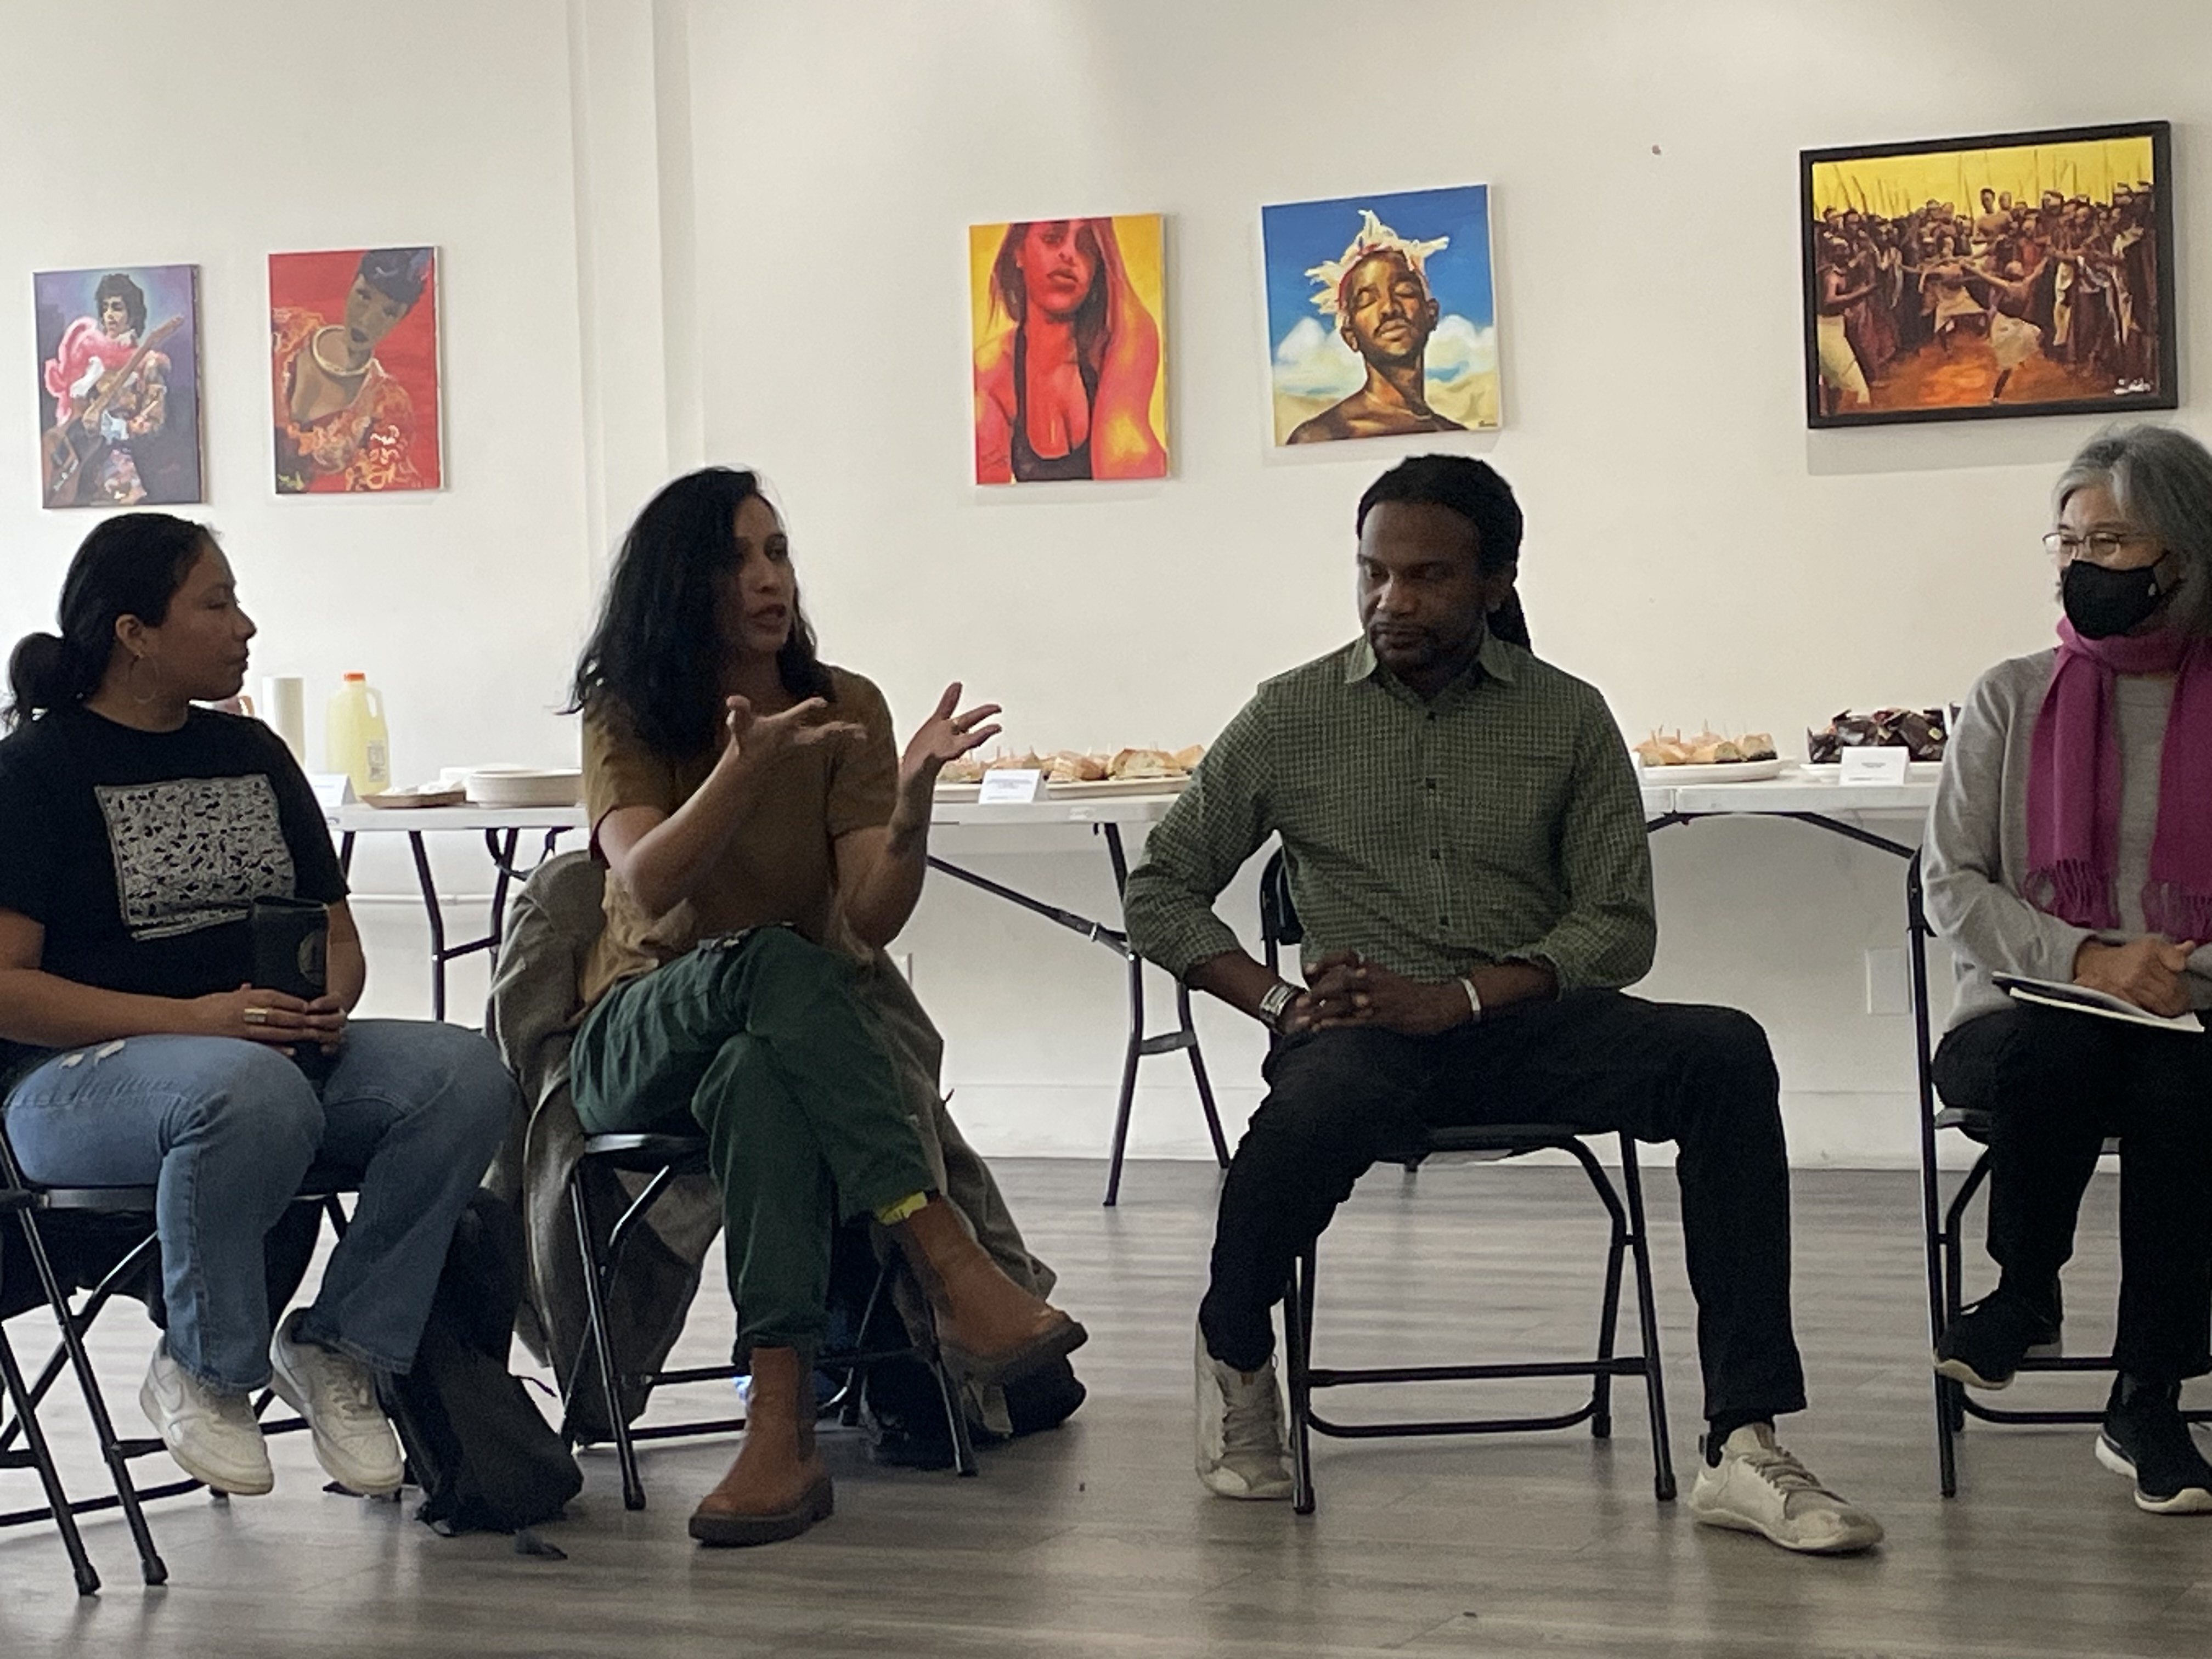 four panelists sit on chairs in an art gallery setting